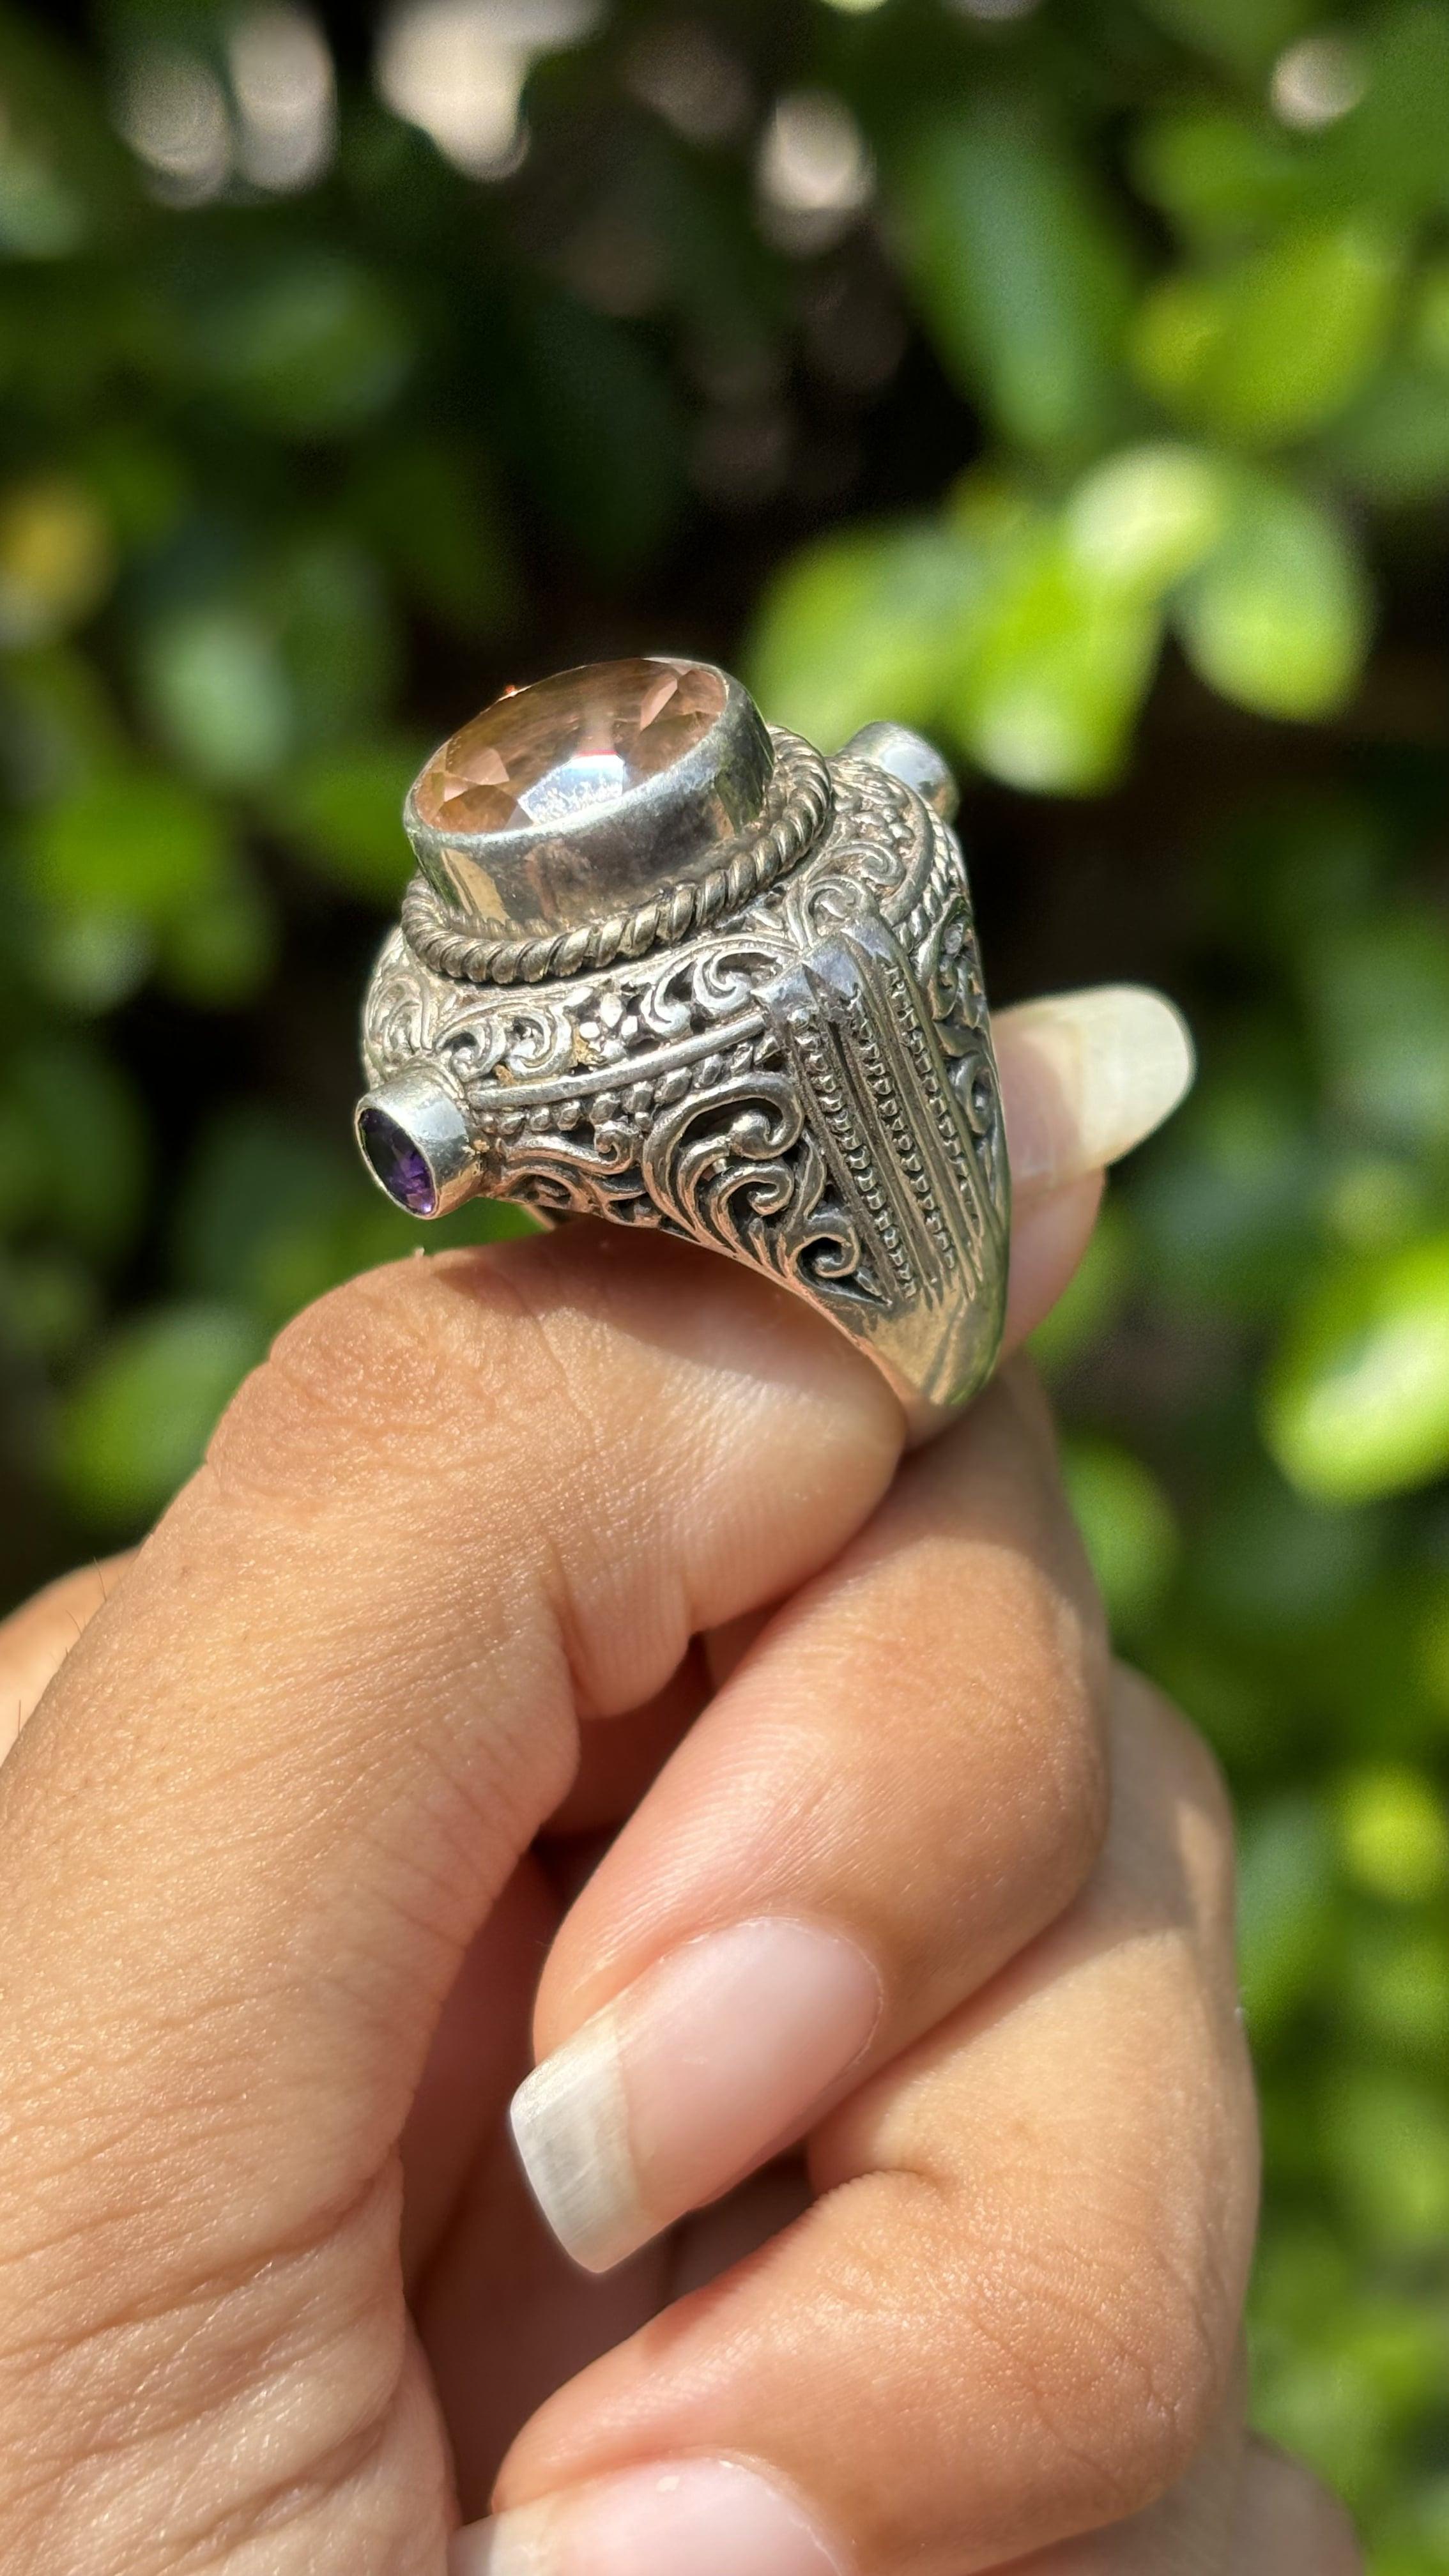 Paying an exquisite tribute to elegance and history, we have our ever-stunning, vintage Cocktail ring that dates back to the 1900s. A cherished relic from an opulent era, this beauty is crafted with meticulous artistry and holds a timeless allure.